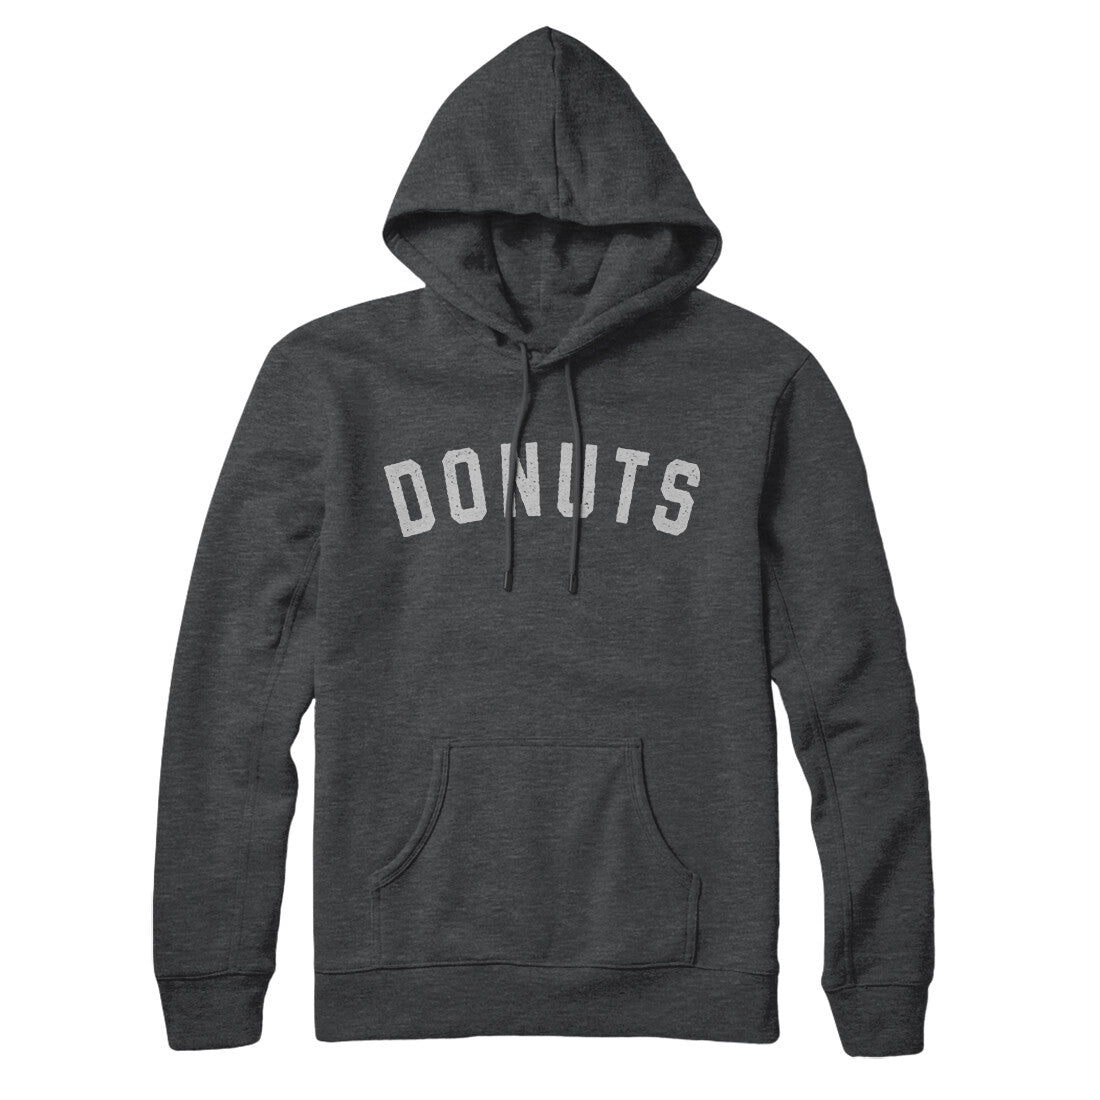 Donuts in Charcoal Heather Color